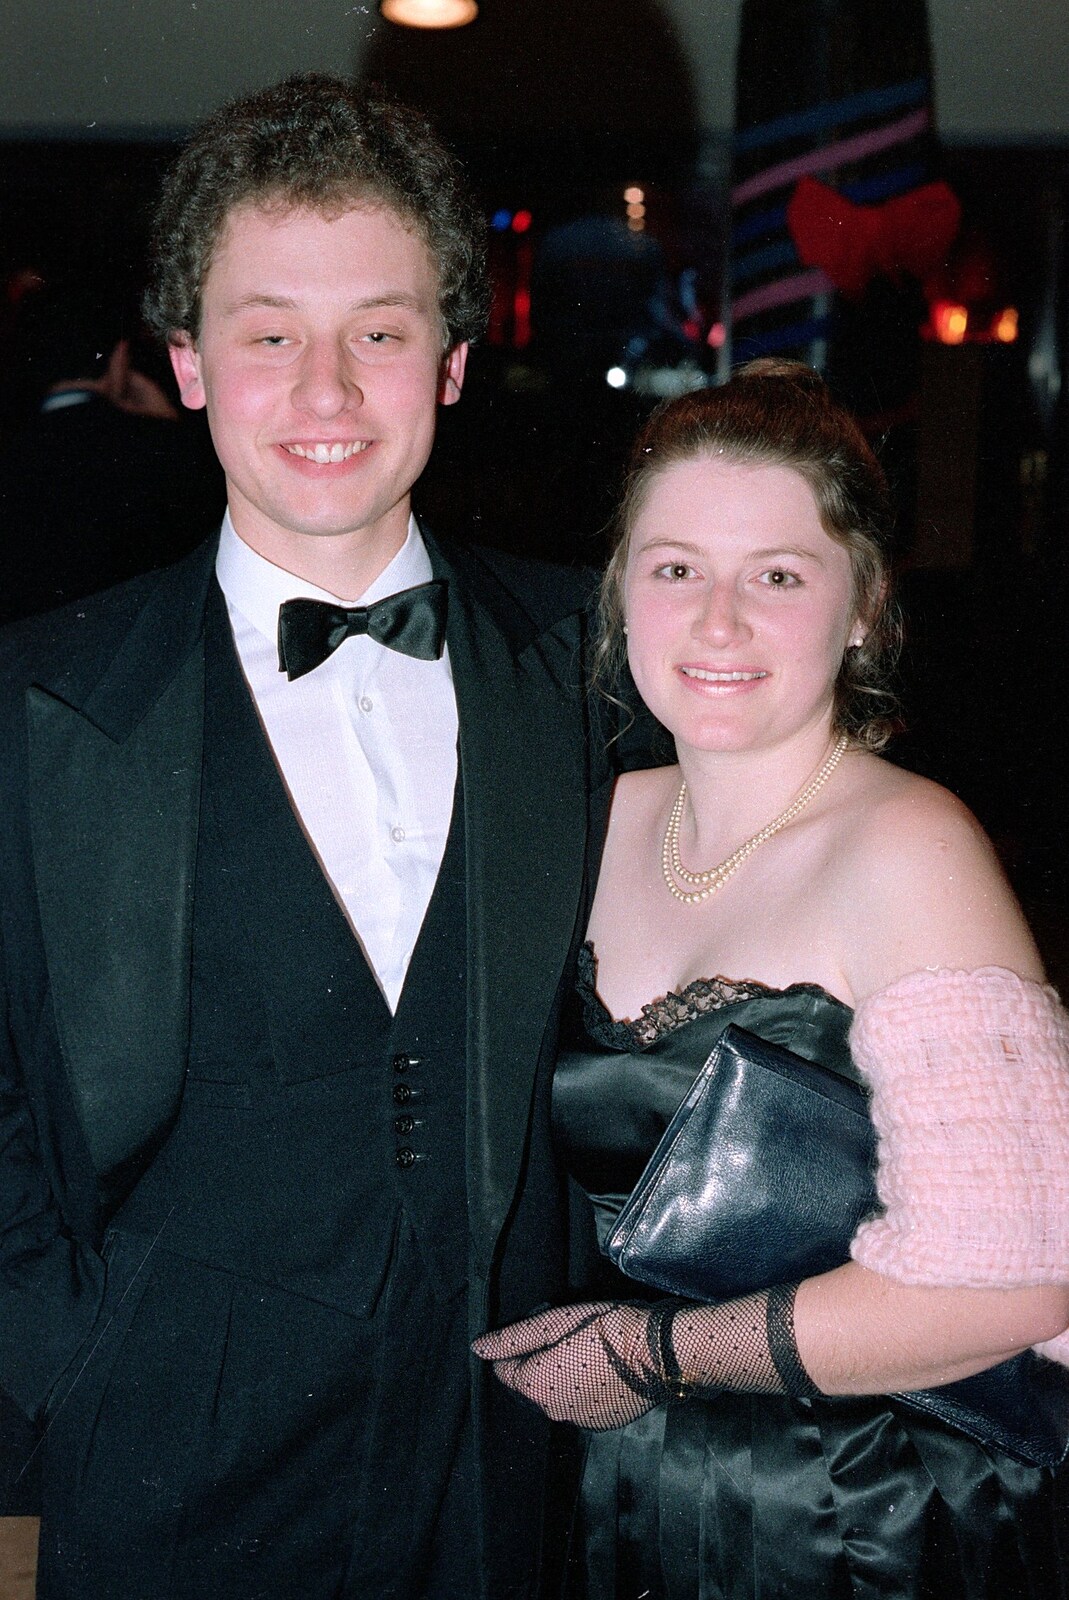 More students pose for a photo from Uni: PPSU May Ball, The Guildhall, Plymouth - 4th May 1987